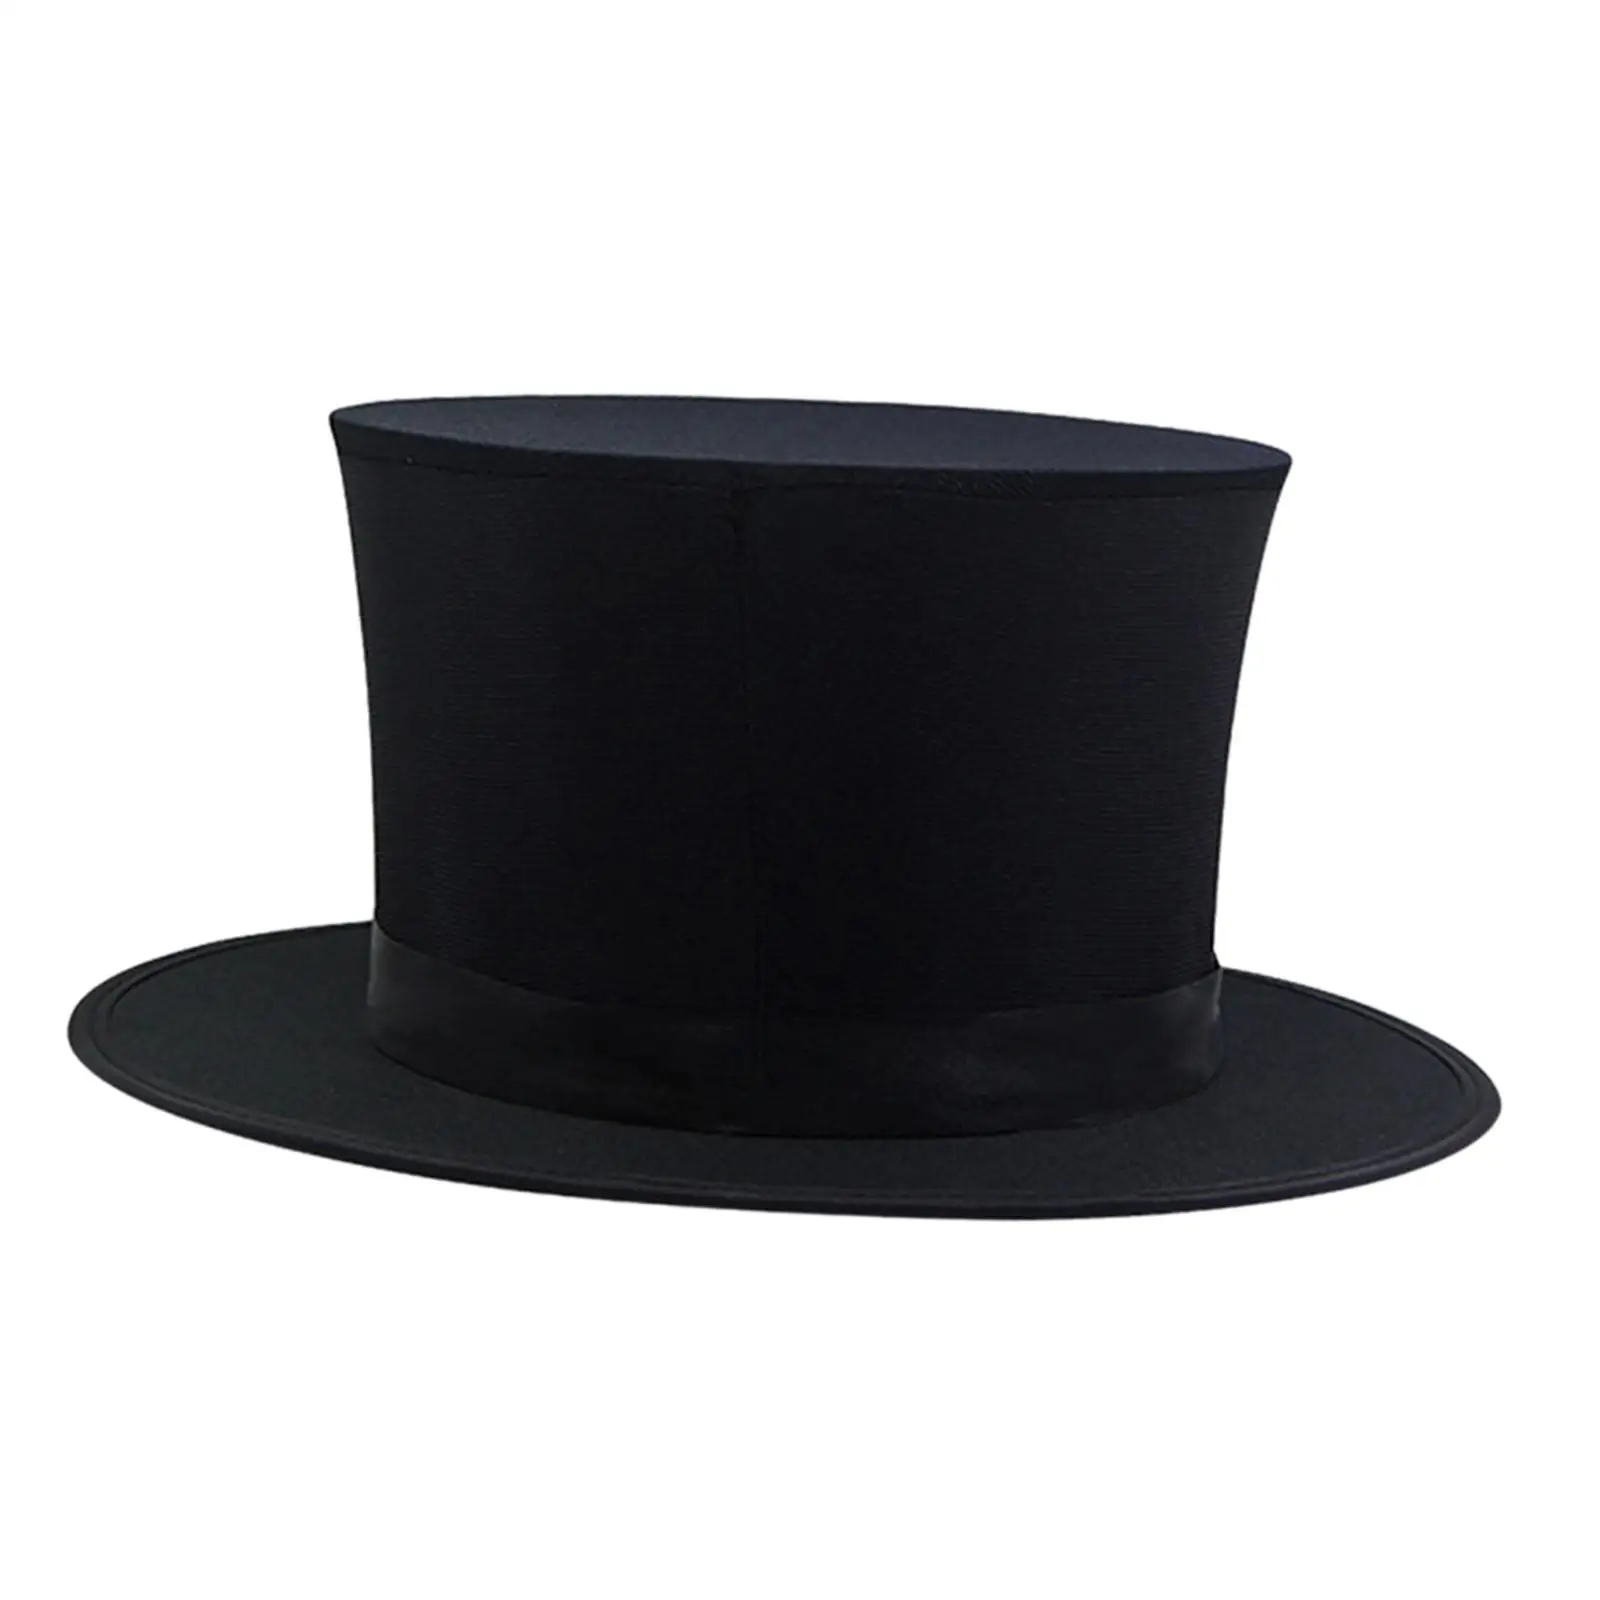 Collapsible Magician Top Hat magical Tricks Game Illusions Essential Supplies for Christmas